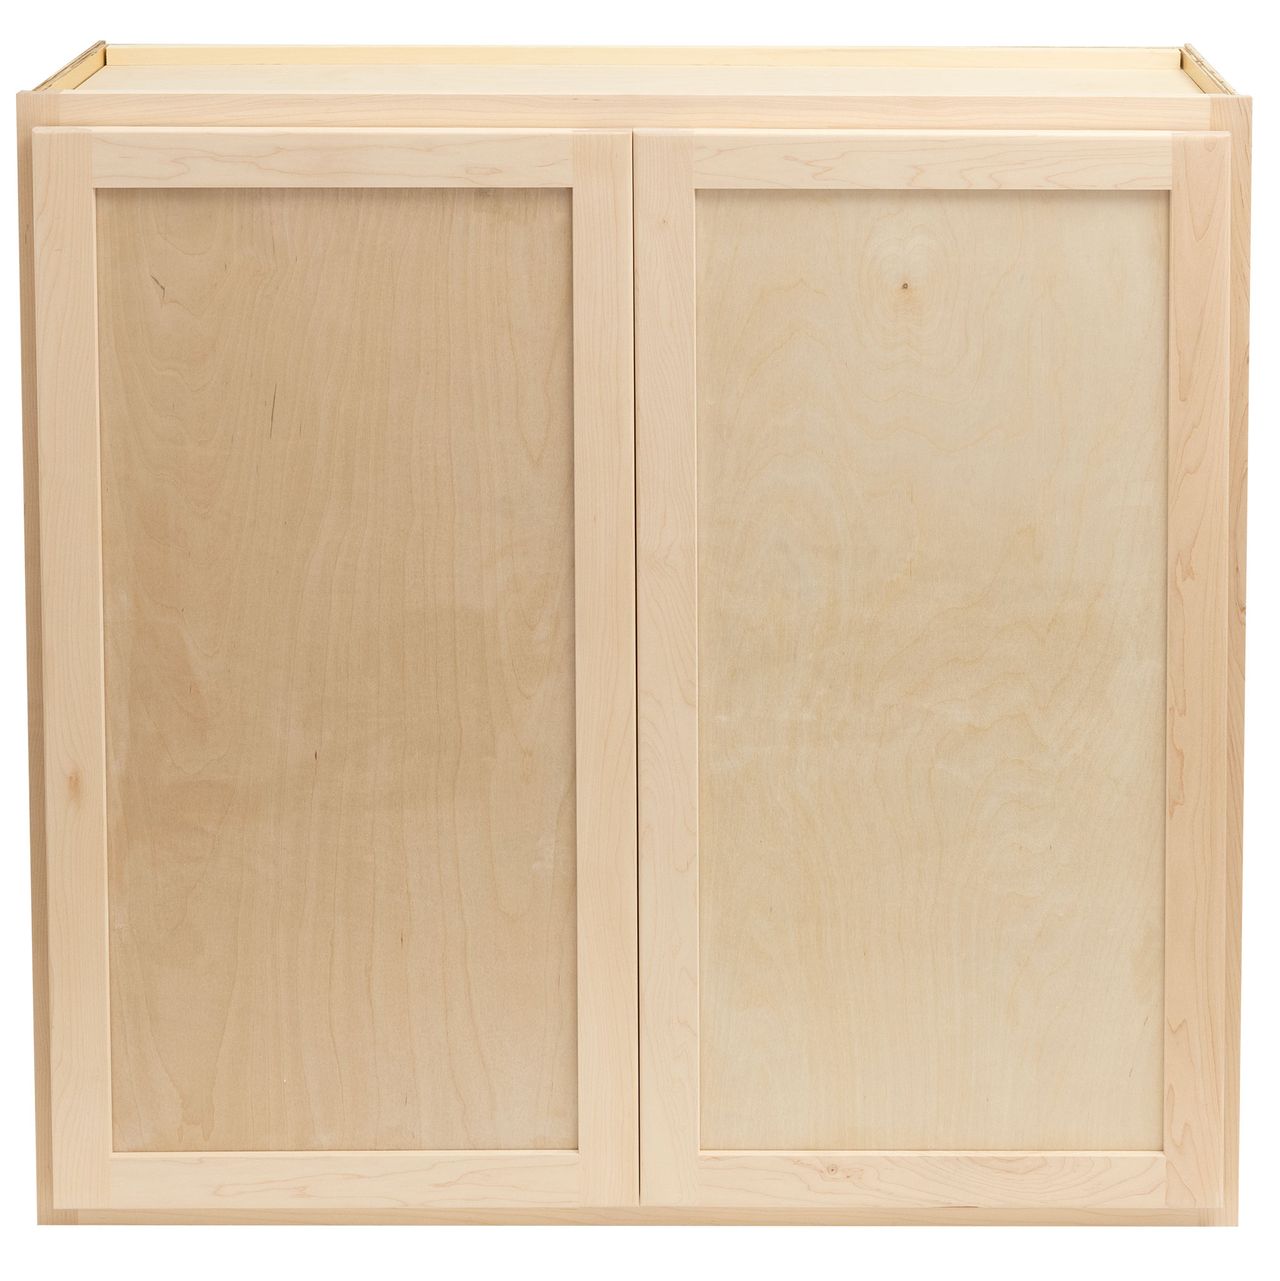 Quicklock RTA (Ready-to-Assemble) Raw Maple Wall Cabinet- Large 36" x (27", 30", 33", 36"W)